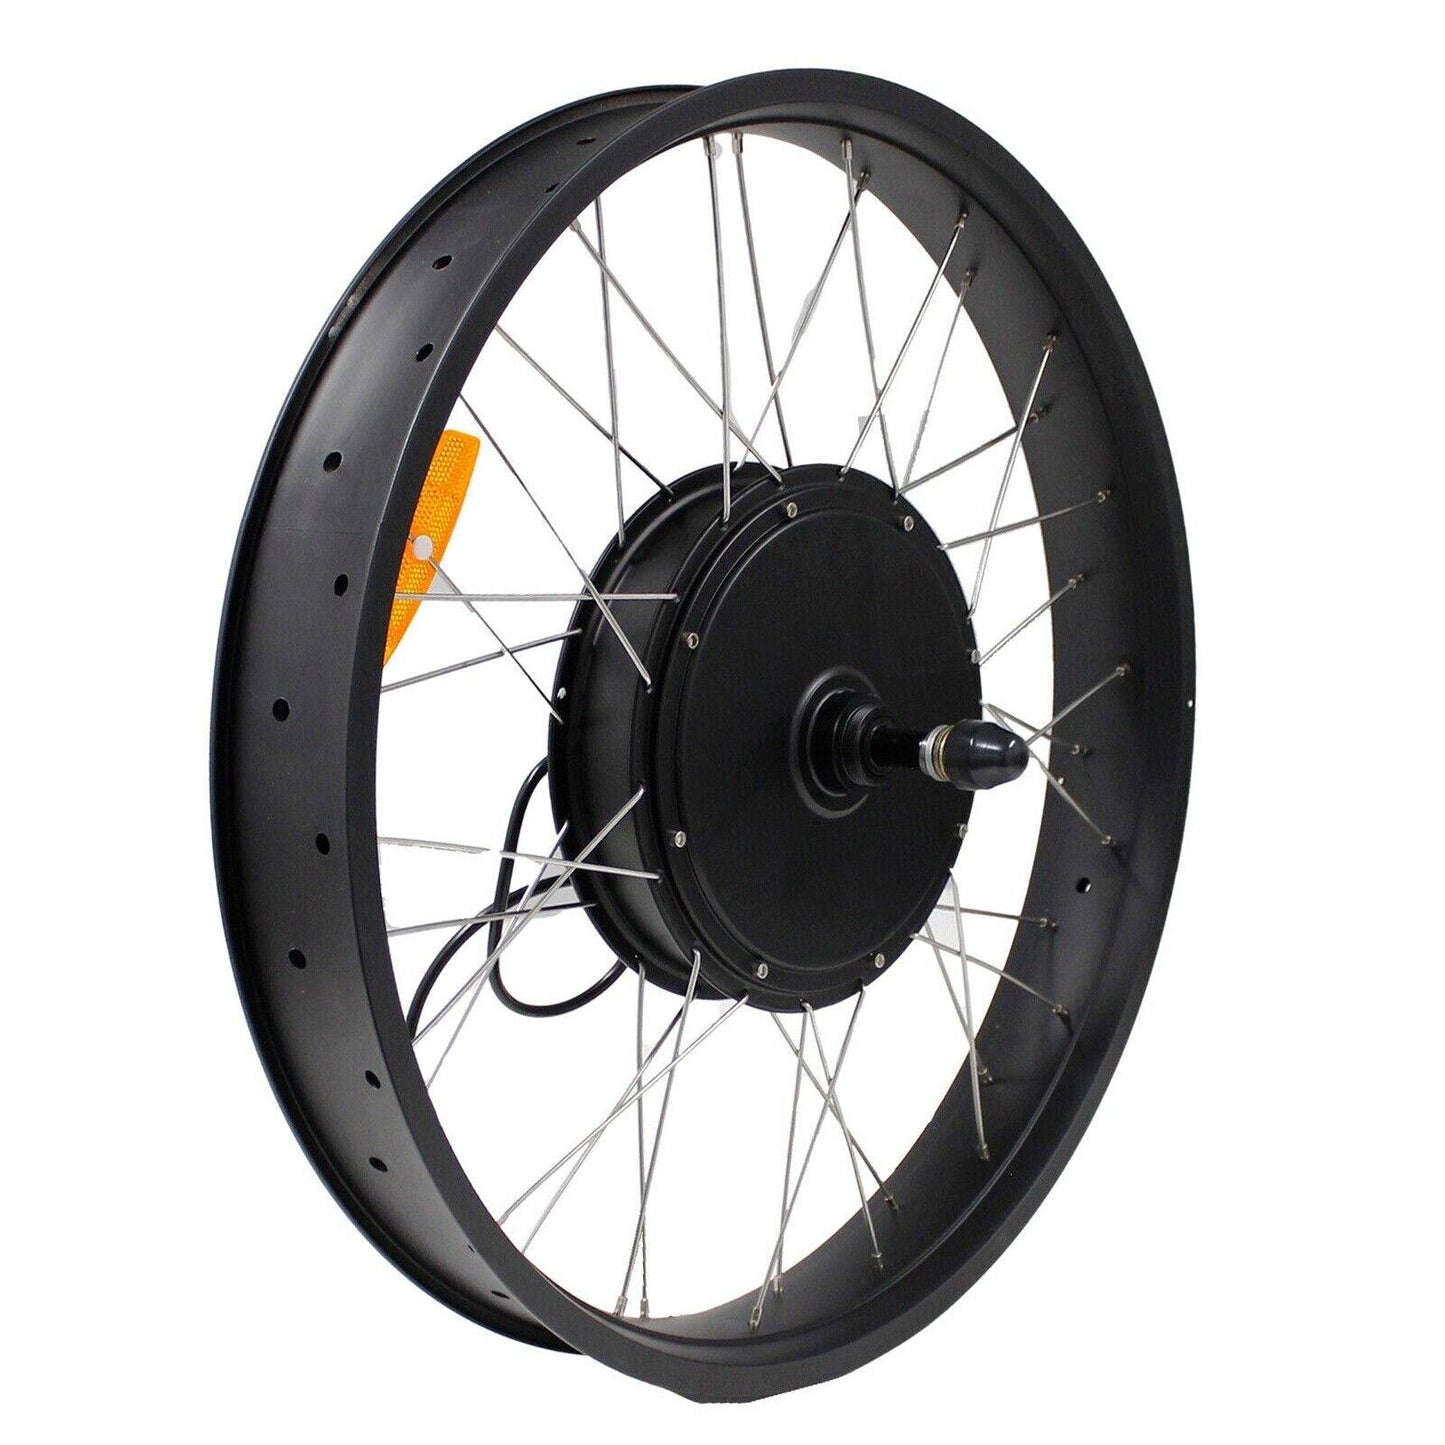 1500W 26" Fat Bike 4.0 Tyre Rear Hub Electric Bike Conversion Kit (Battery & Charger Not Included) - TDRMOTO